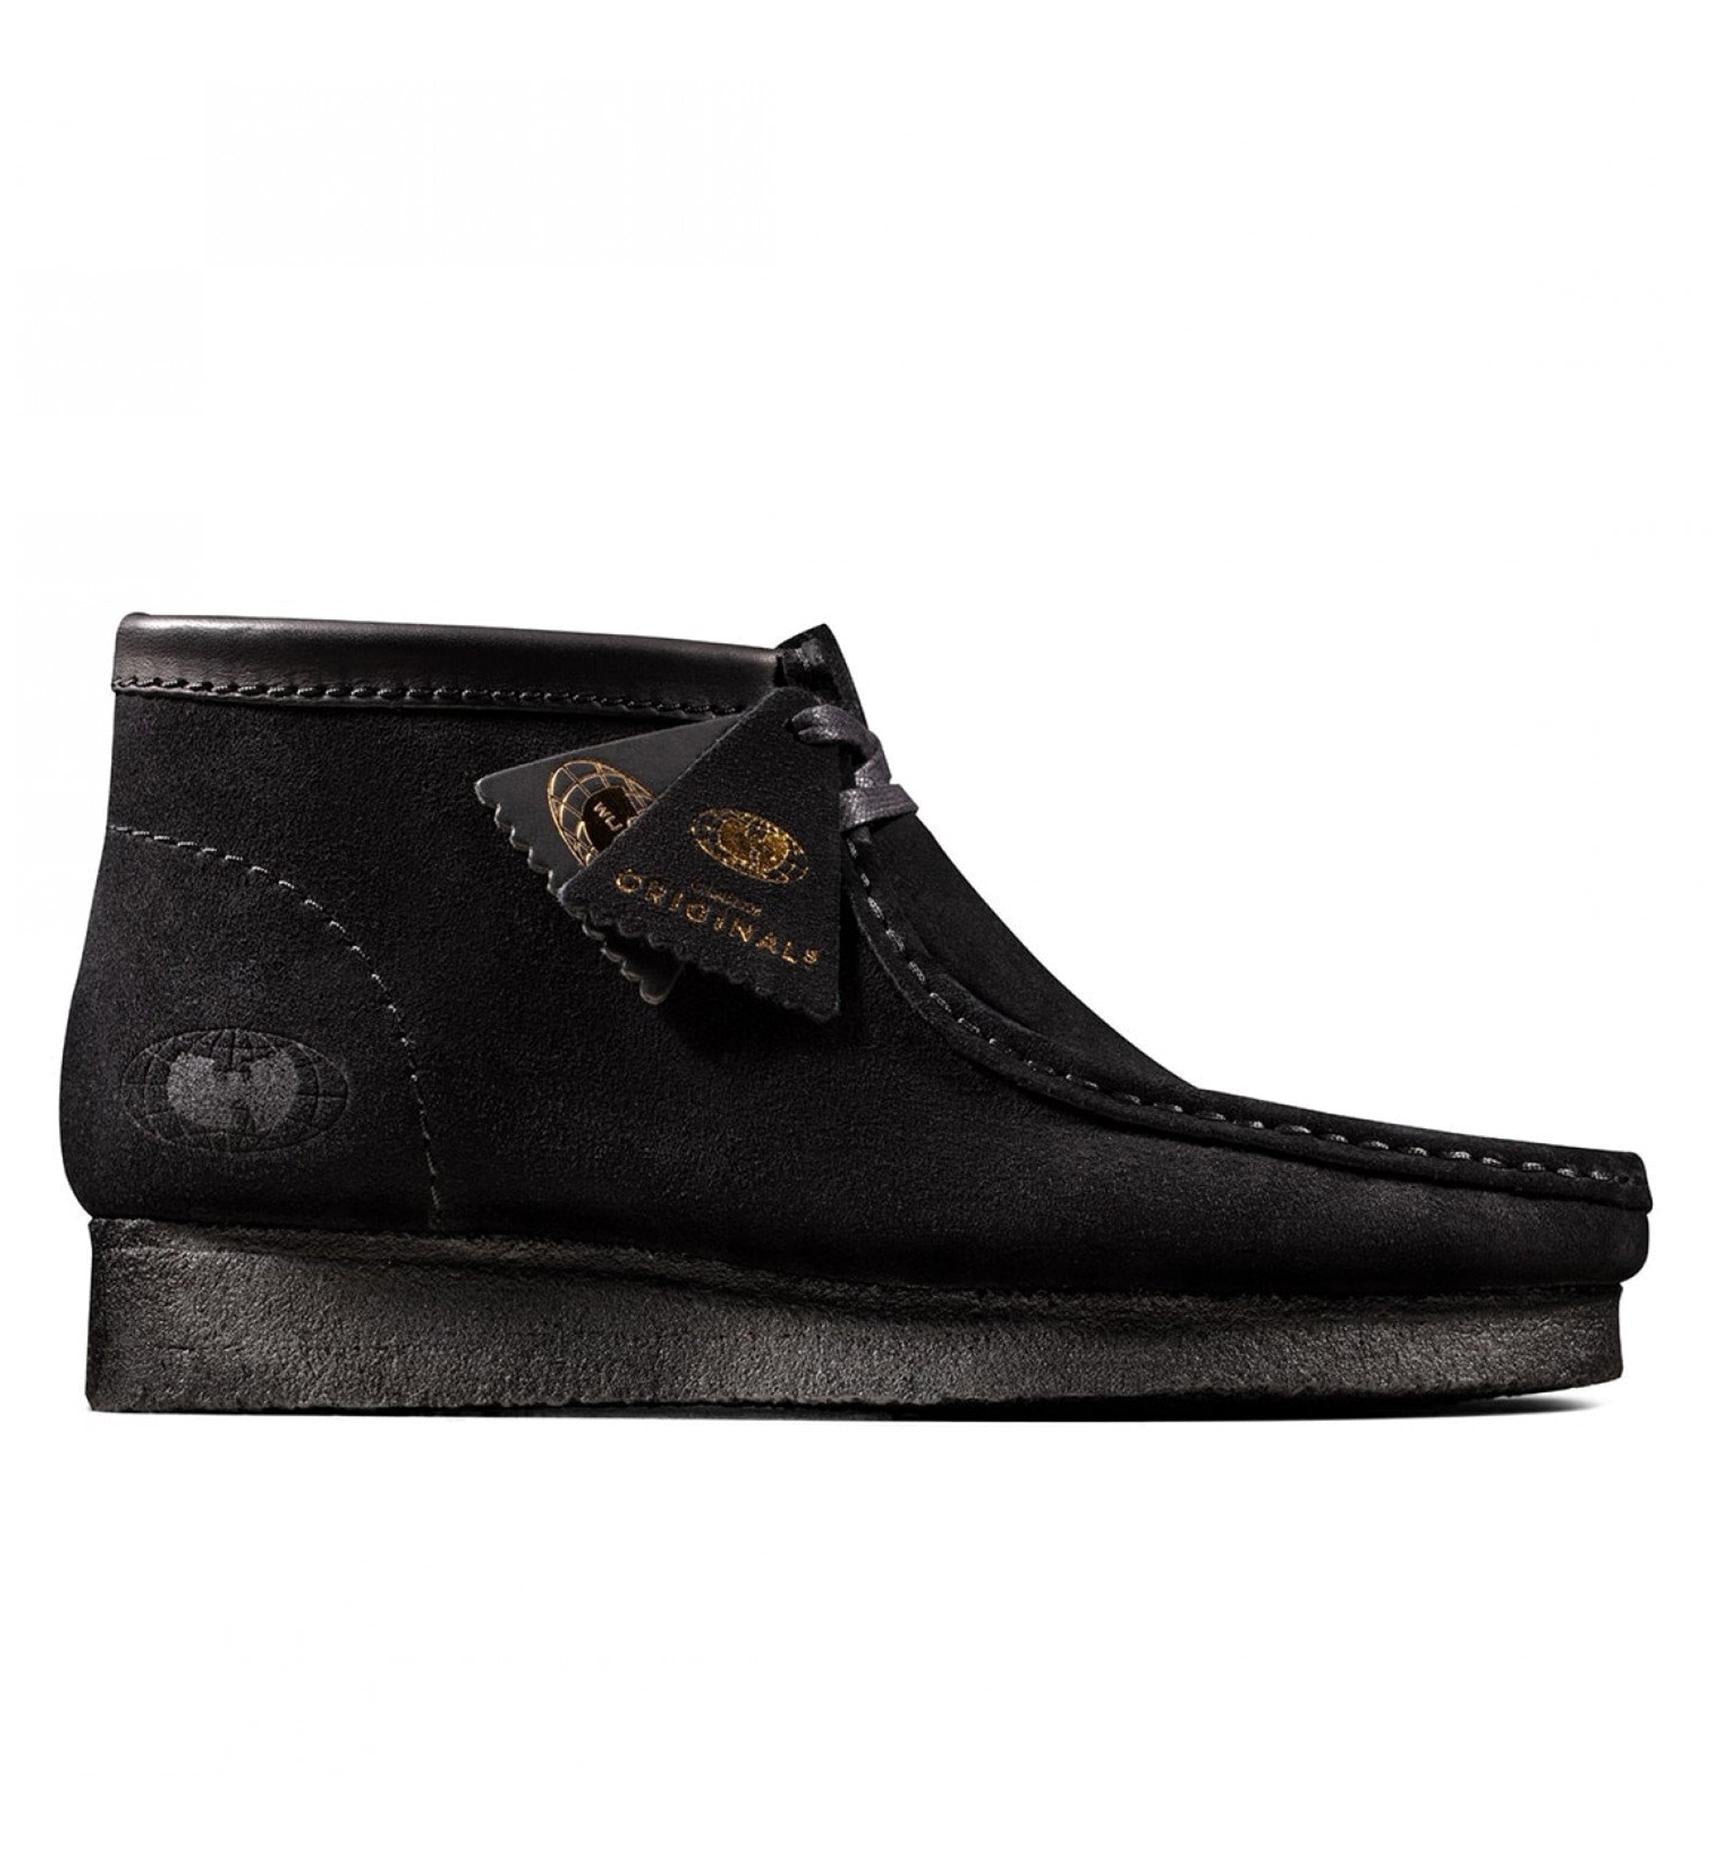 wu tang wallabees for sale